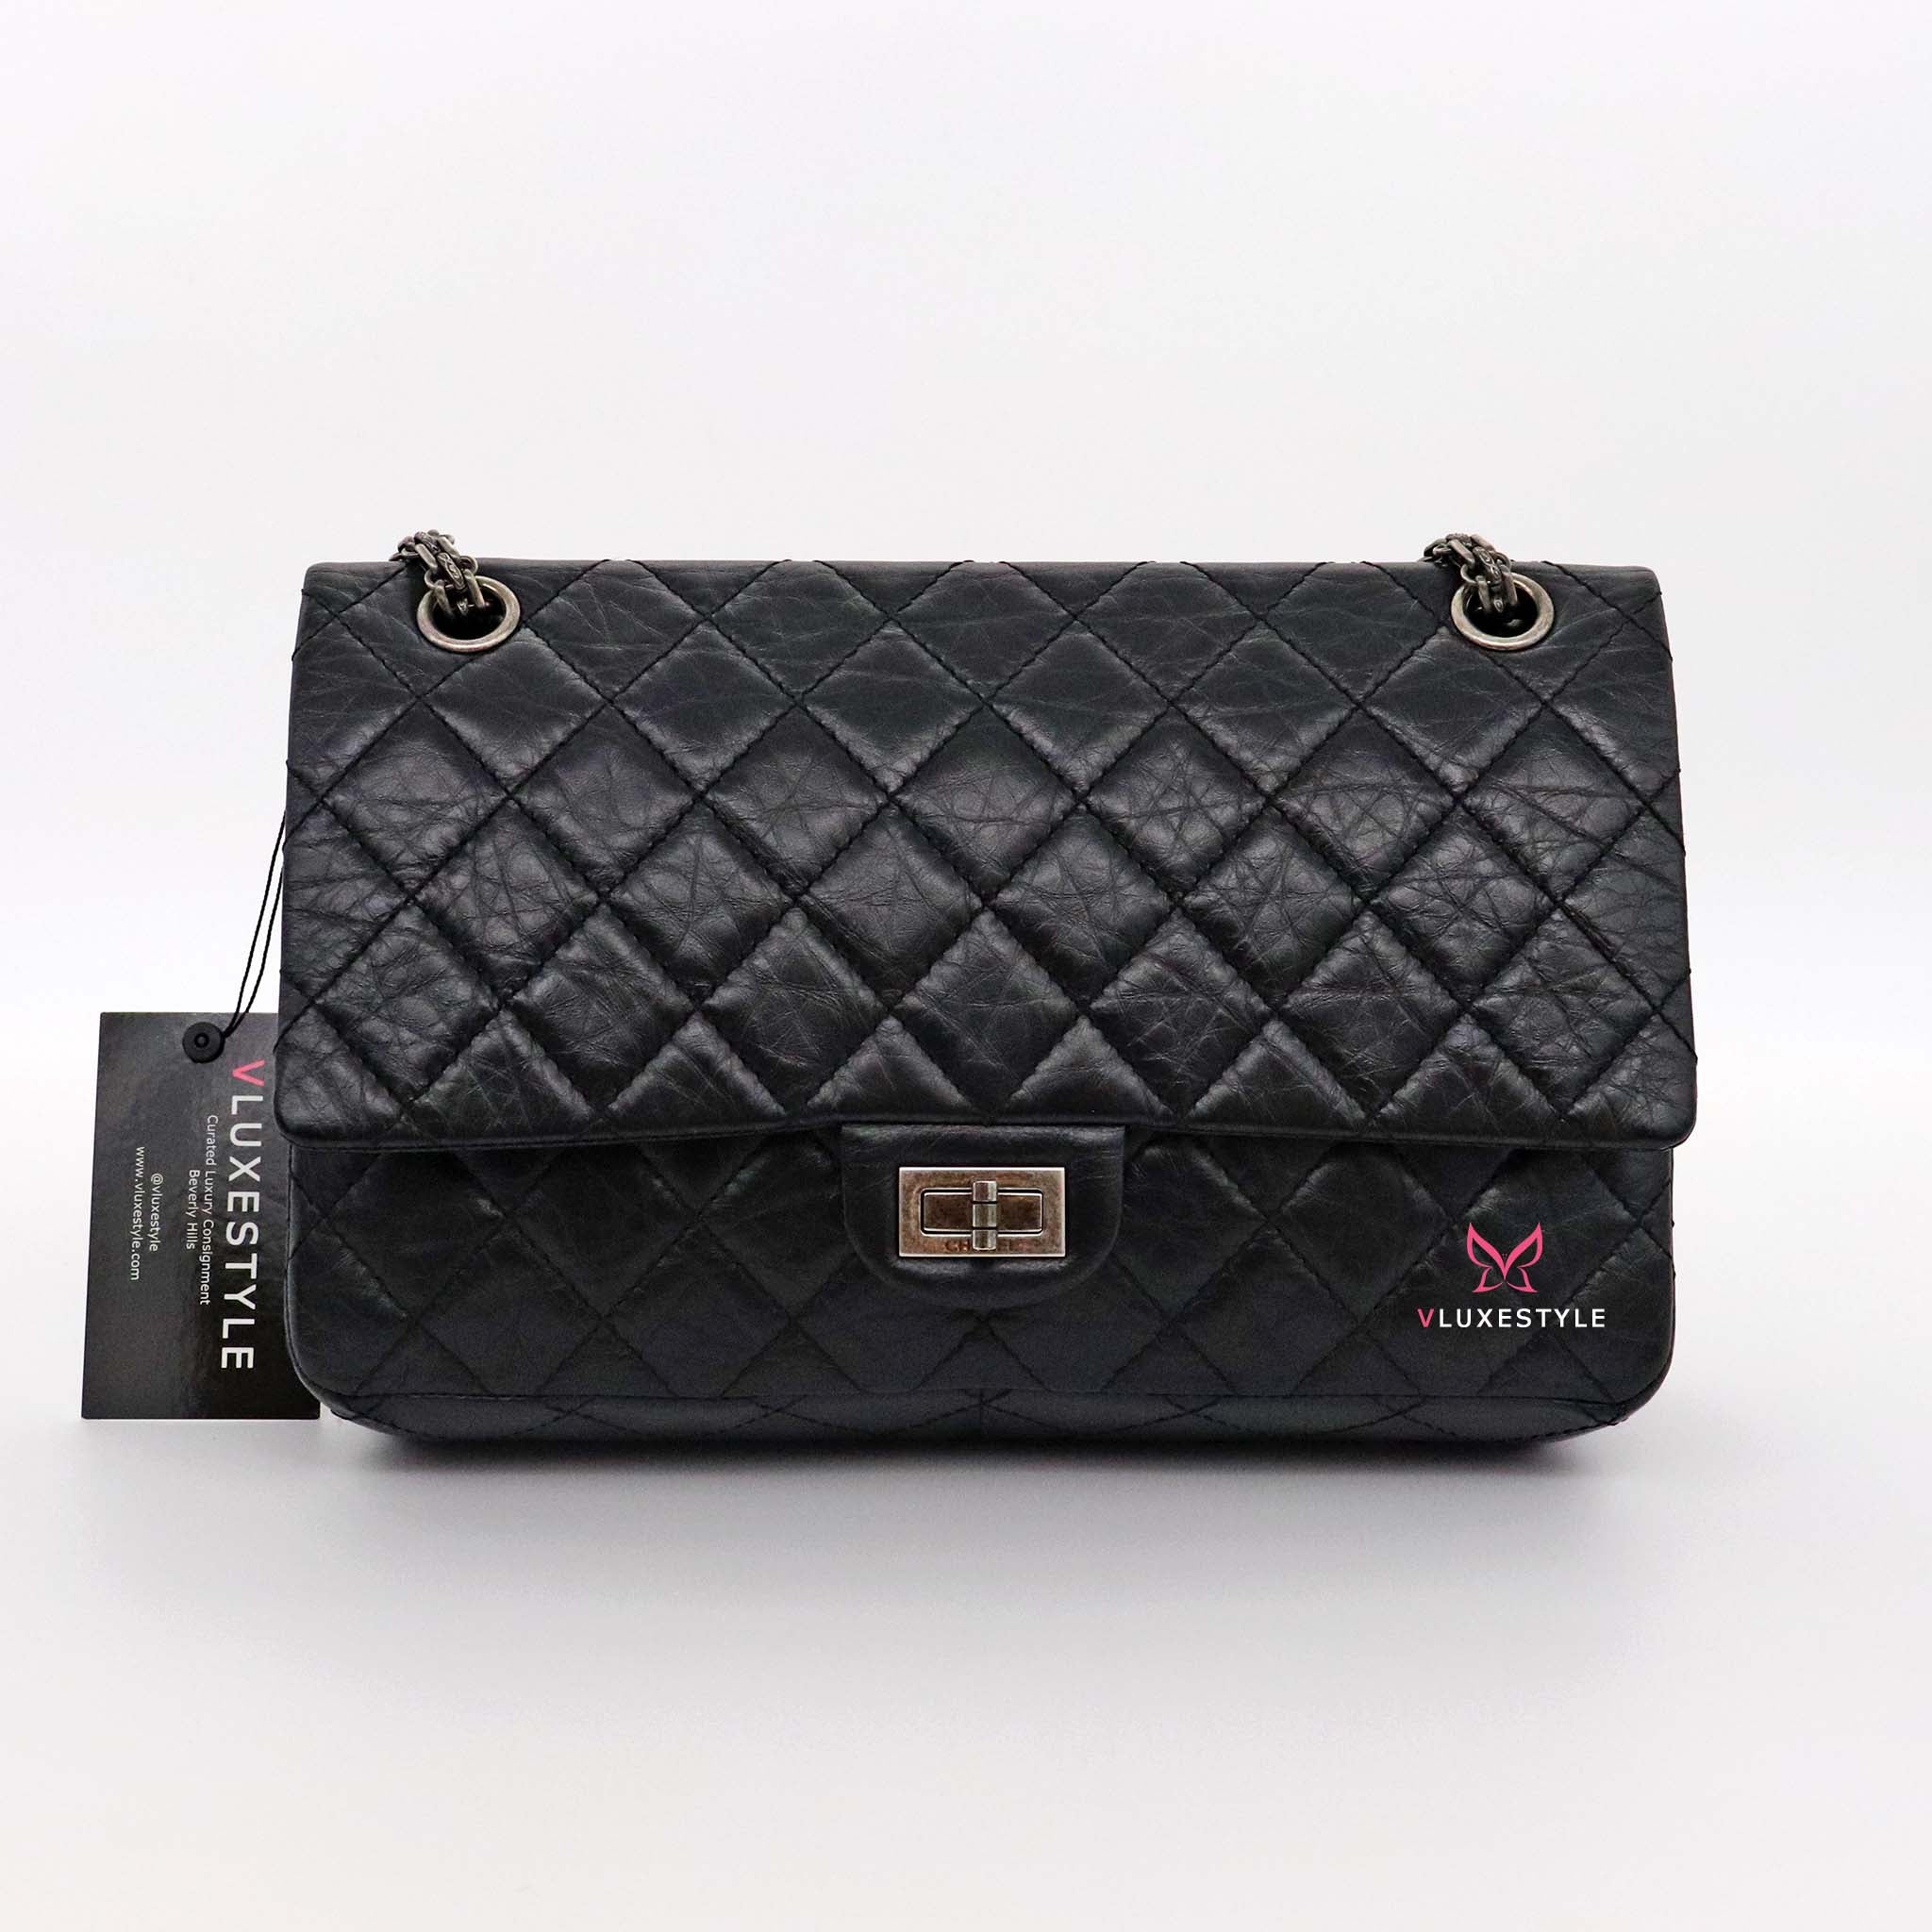 Chanel Black Quilted Crackled Leather Medium Reissue Camera Bag